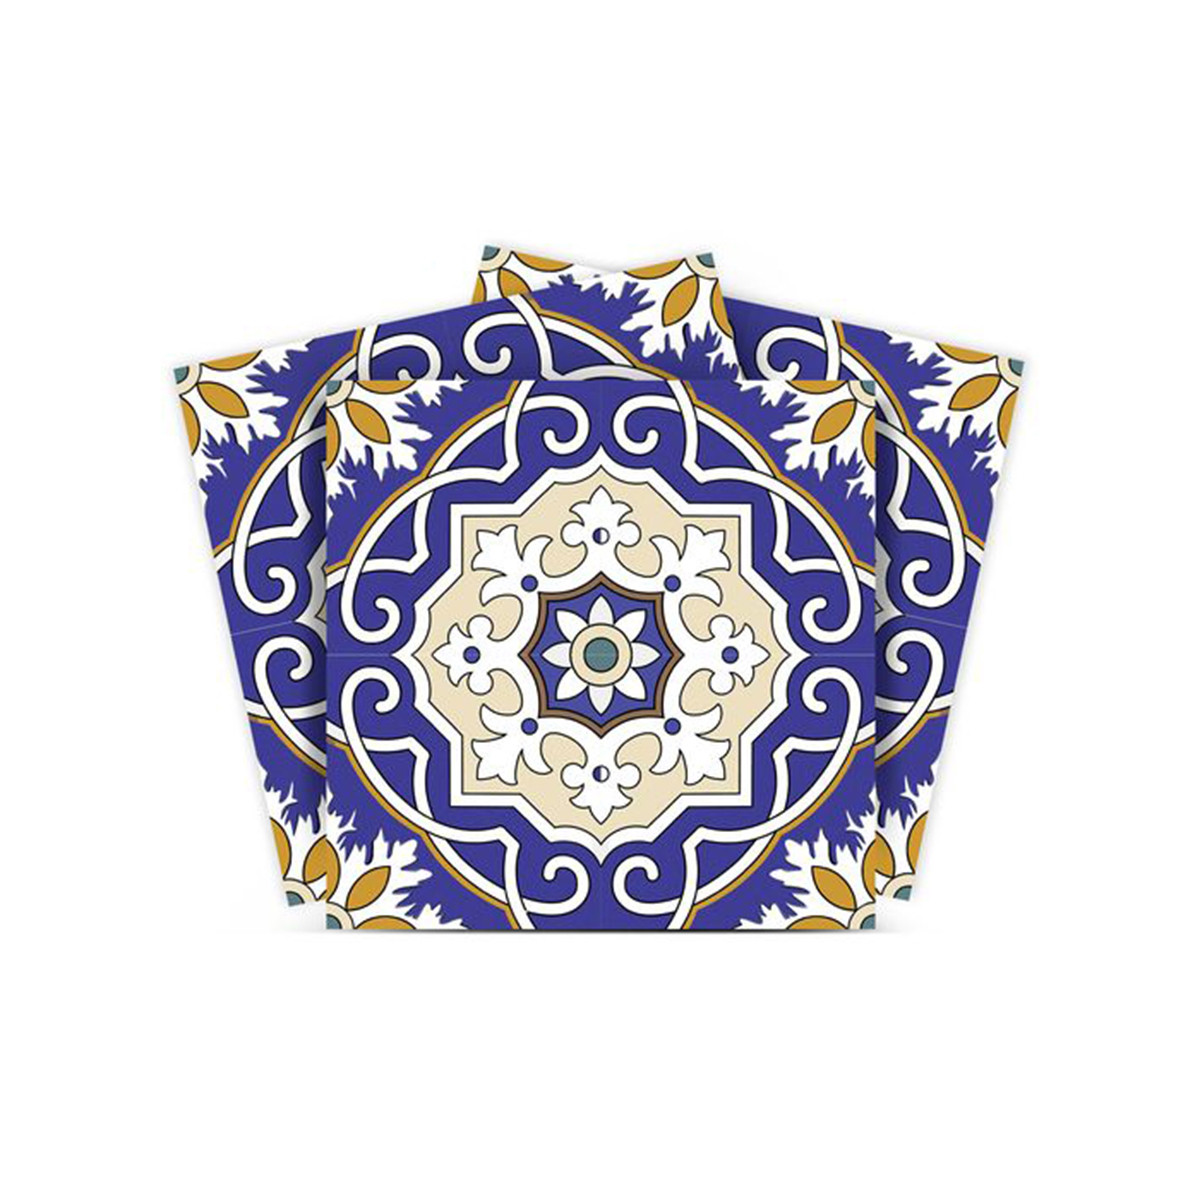 8" X 8" Blue White and Gold Mosaic Removable Tiles-399834-1